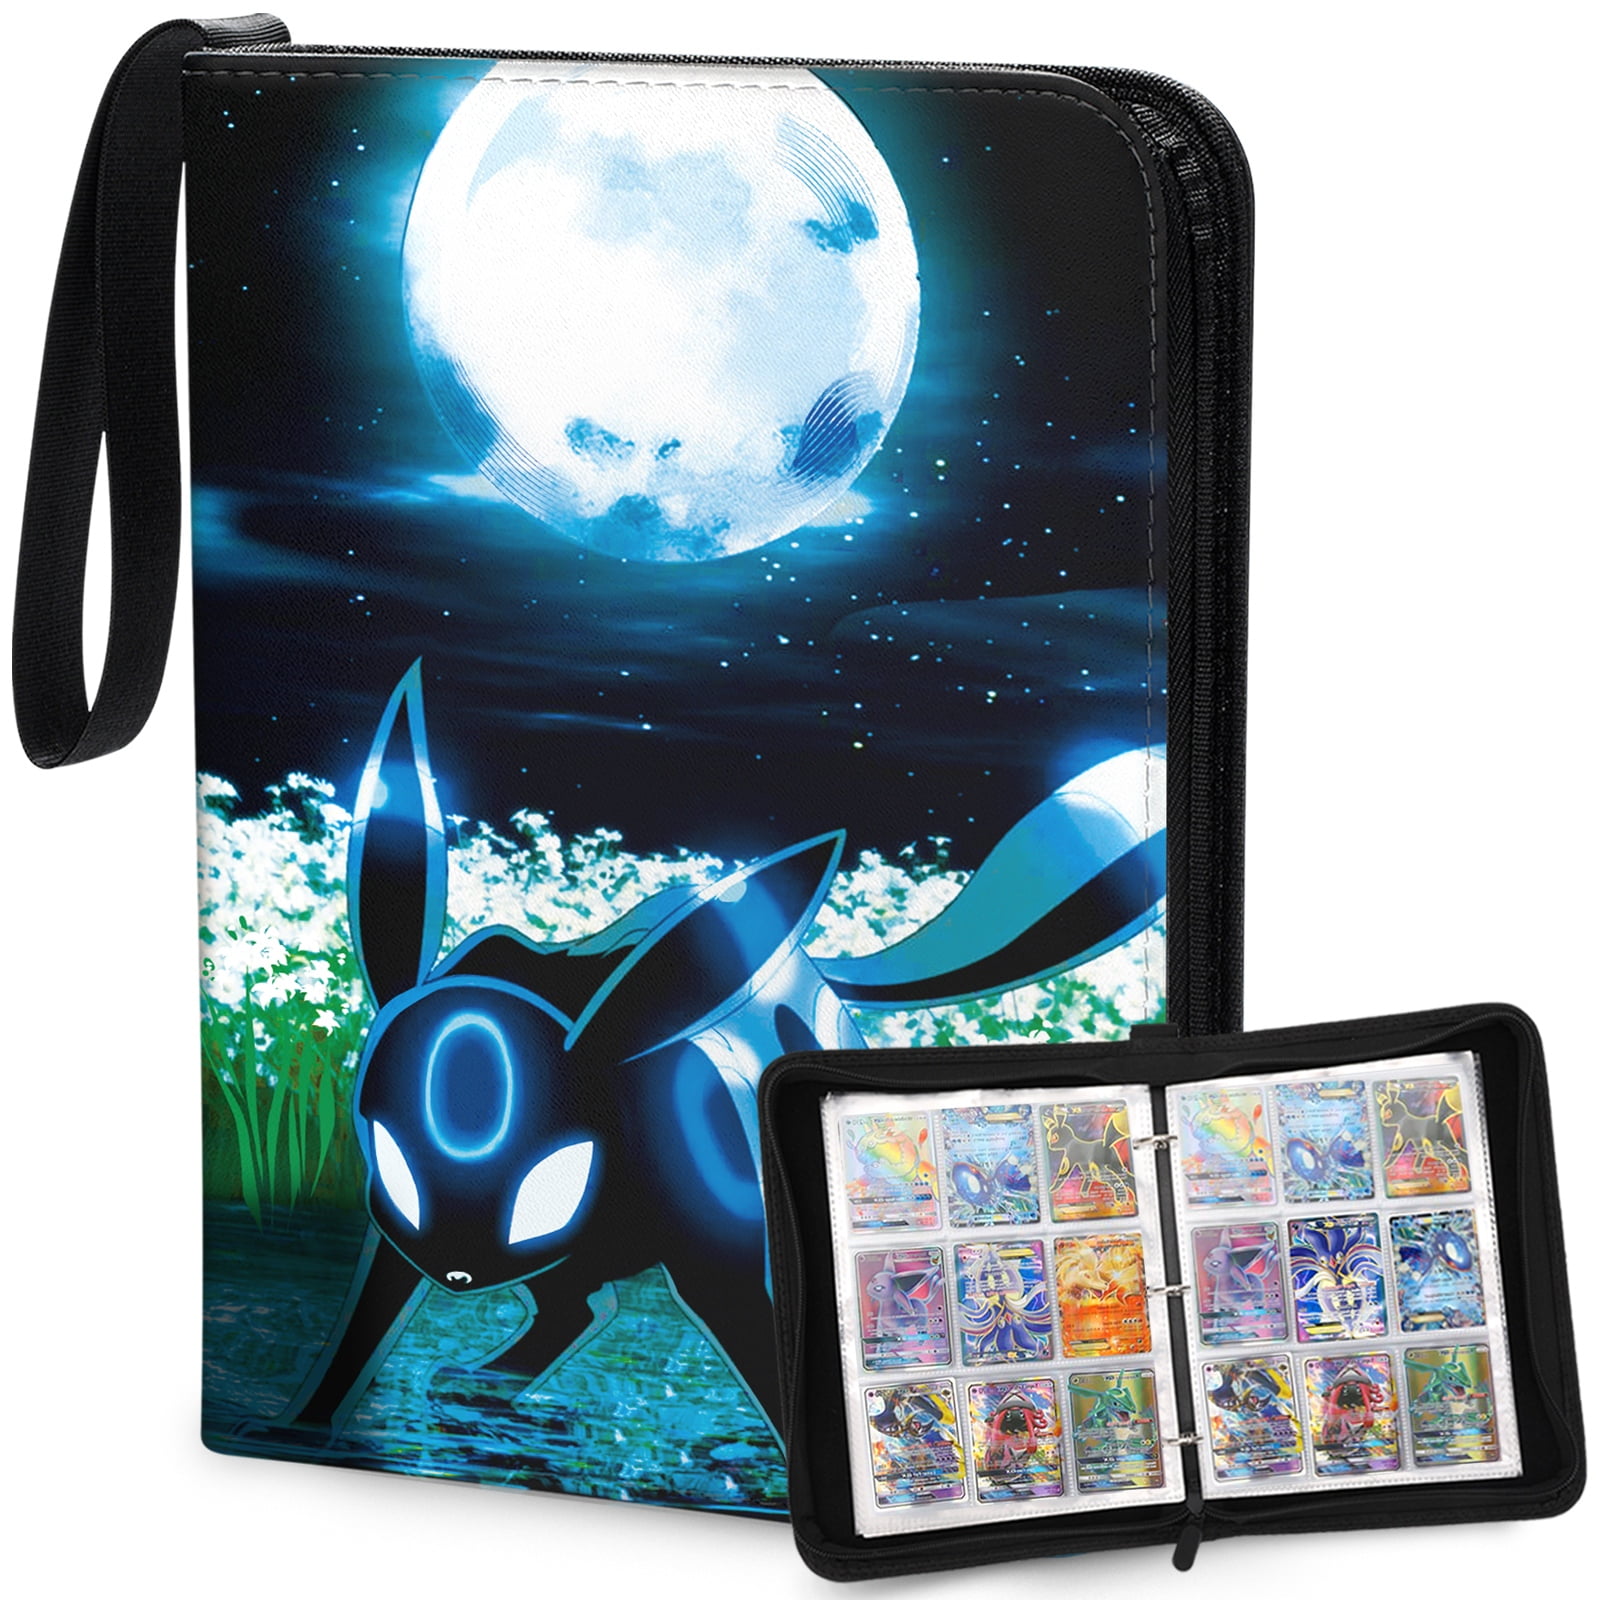 Zipper 3 Ring Binder Game Card Sleeves Collection 4 Pocket Trading Card  Pages for Your Collection Card Album Leather Side Loading 9 Pocket Binder  for Cards - China Card Binders, Pokemon Card